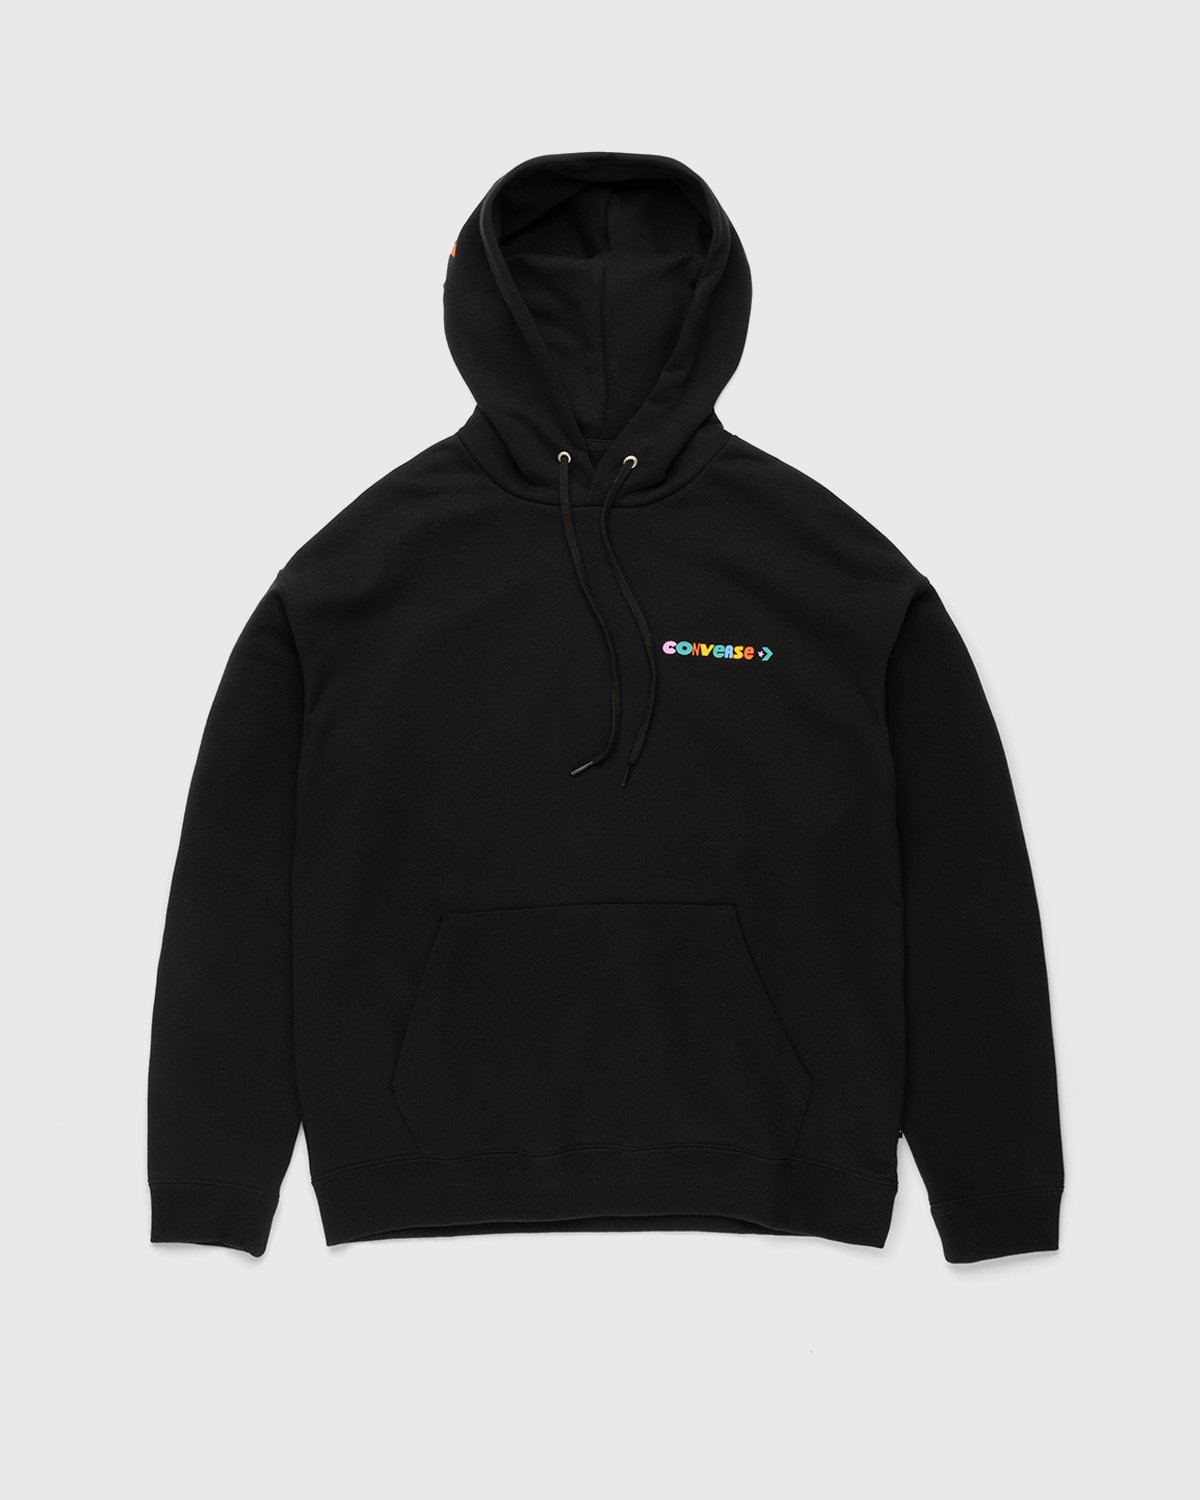 Converse - Much Love Graphic Hoodie Black - Clothing - Black - Image 2